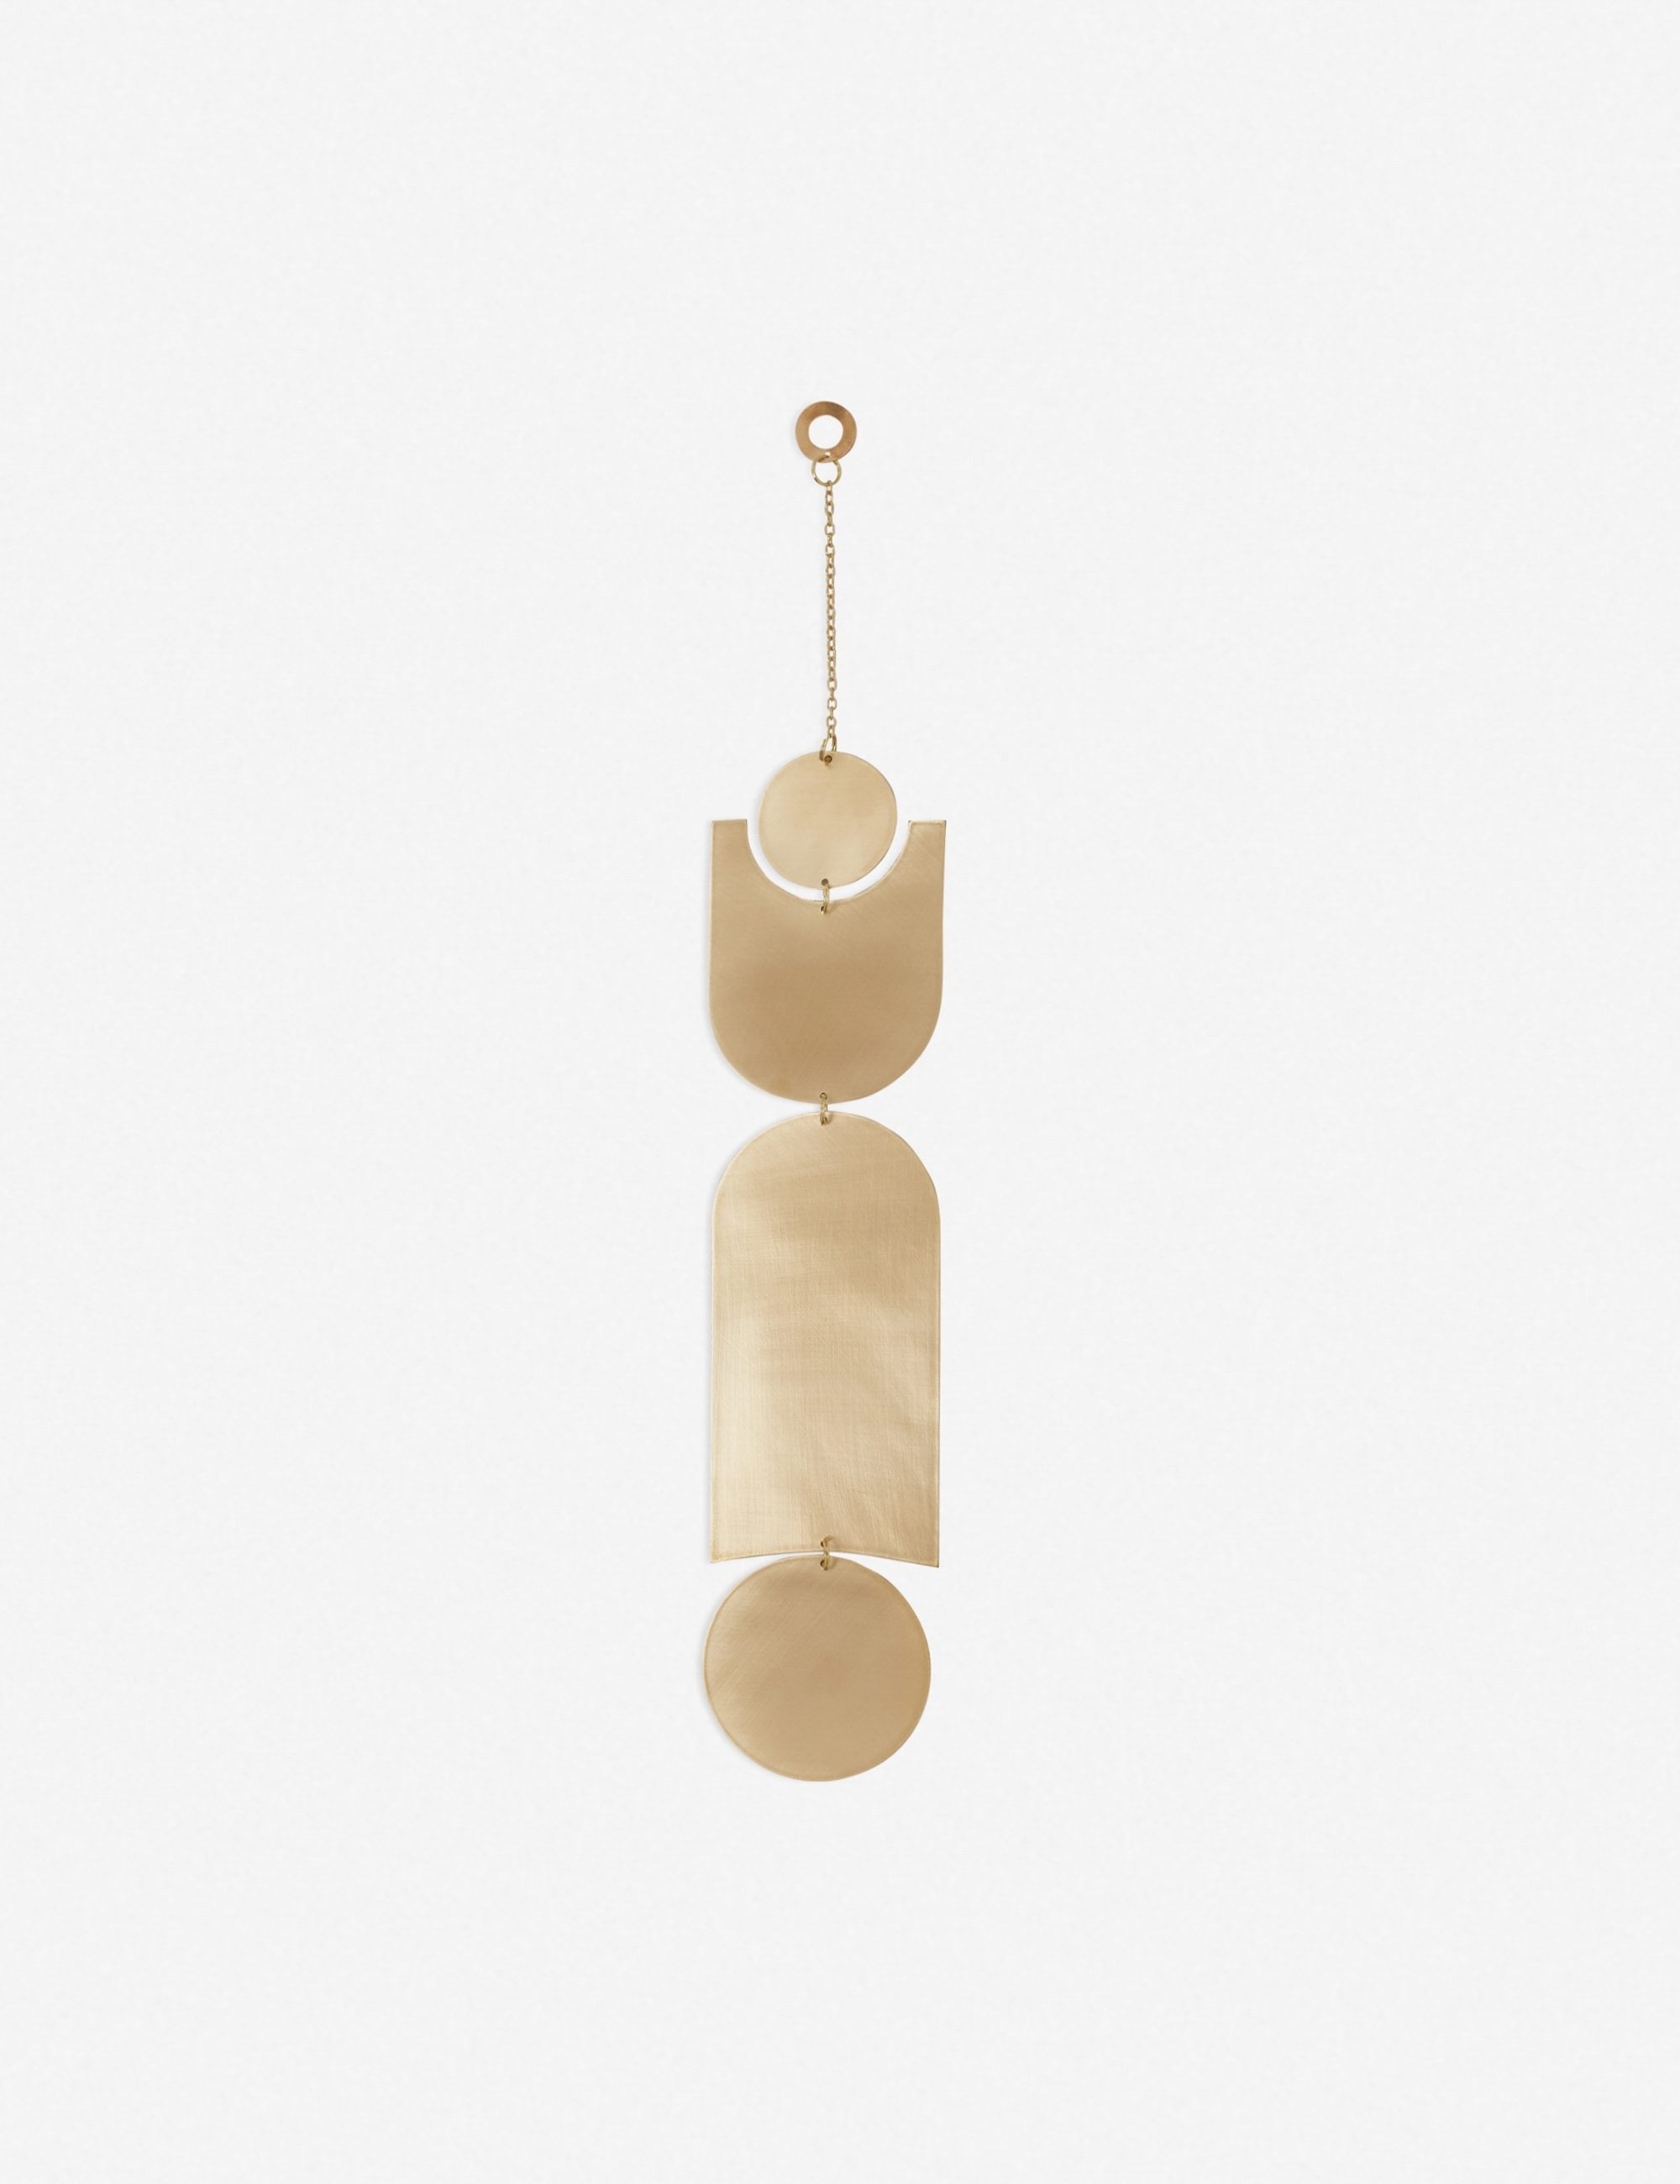 Reflect Wall Hanging by Circle & Line - Image 0